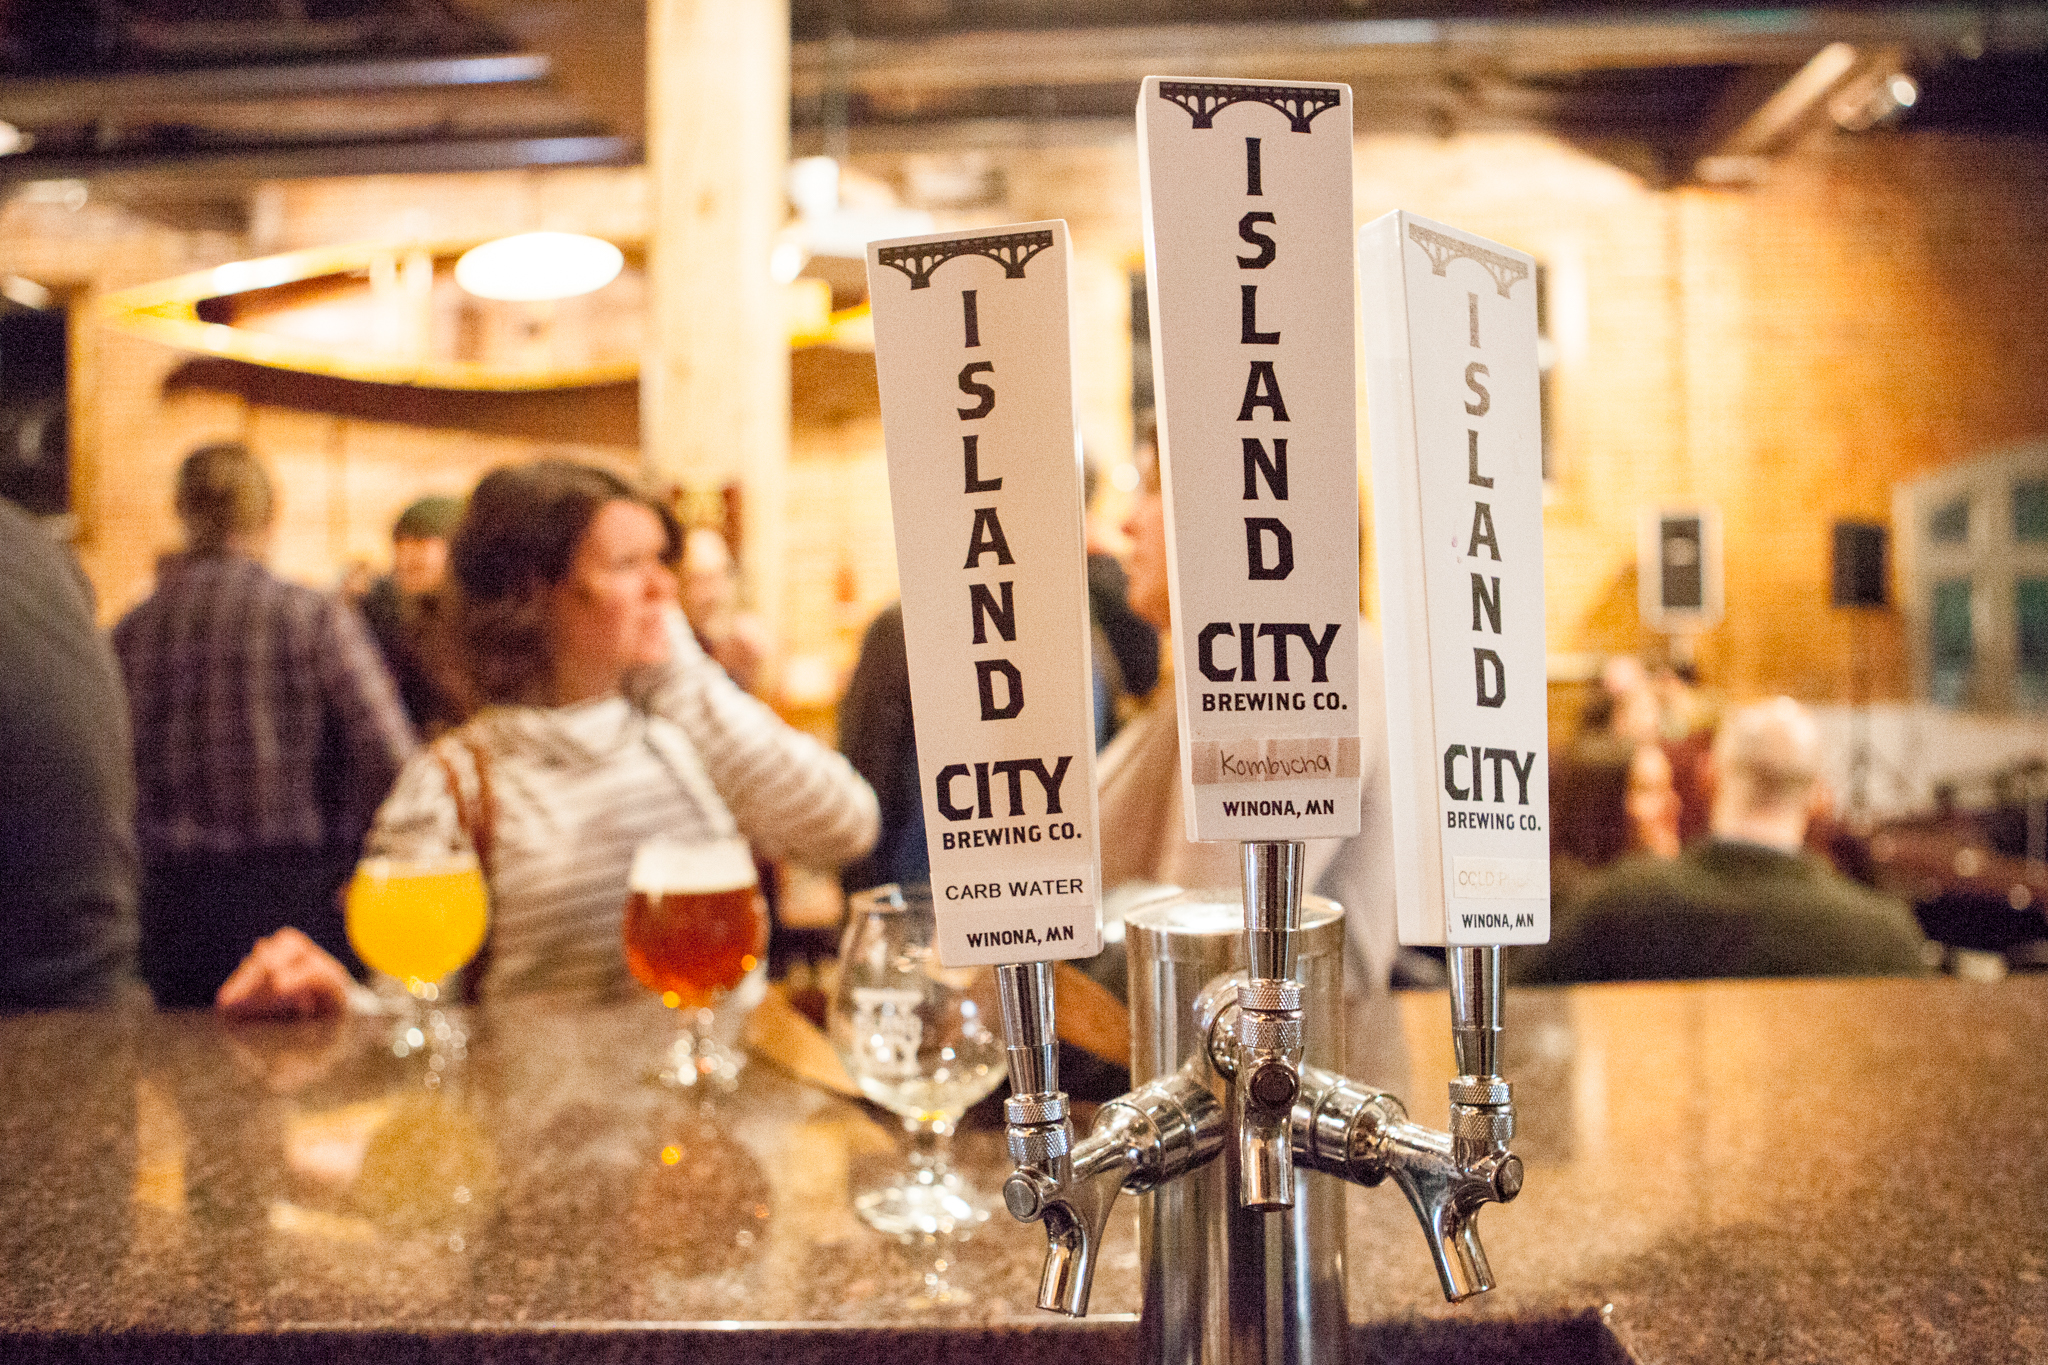 Beer taps at Island City Brewing Company pour unique microbrews